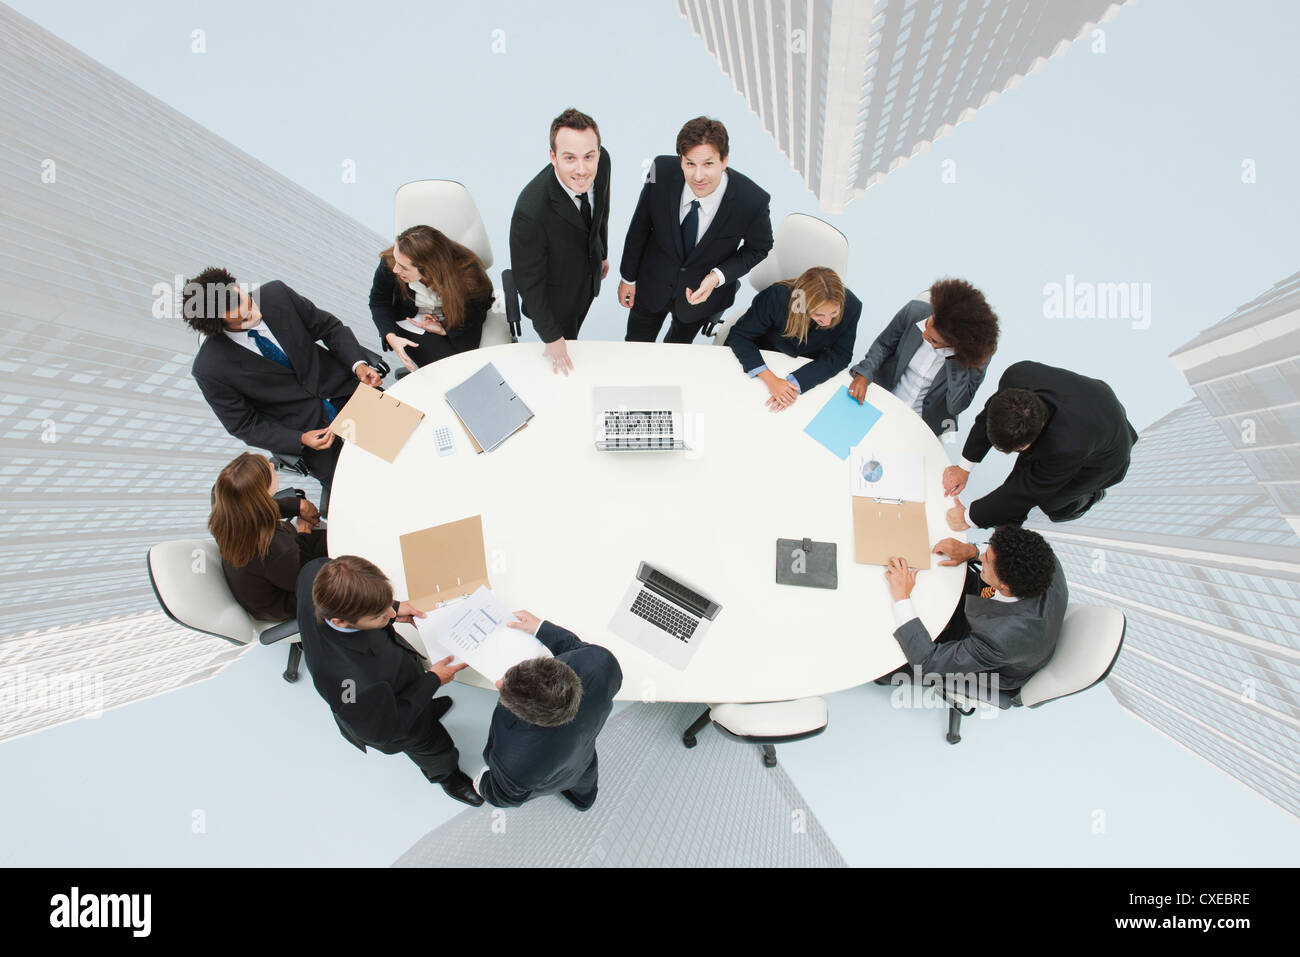 Business executives meeting on top of superimposed image of skyscrapers Stock Photo